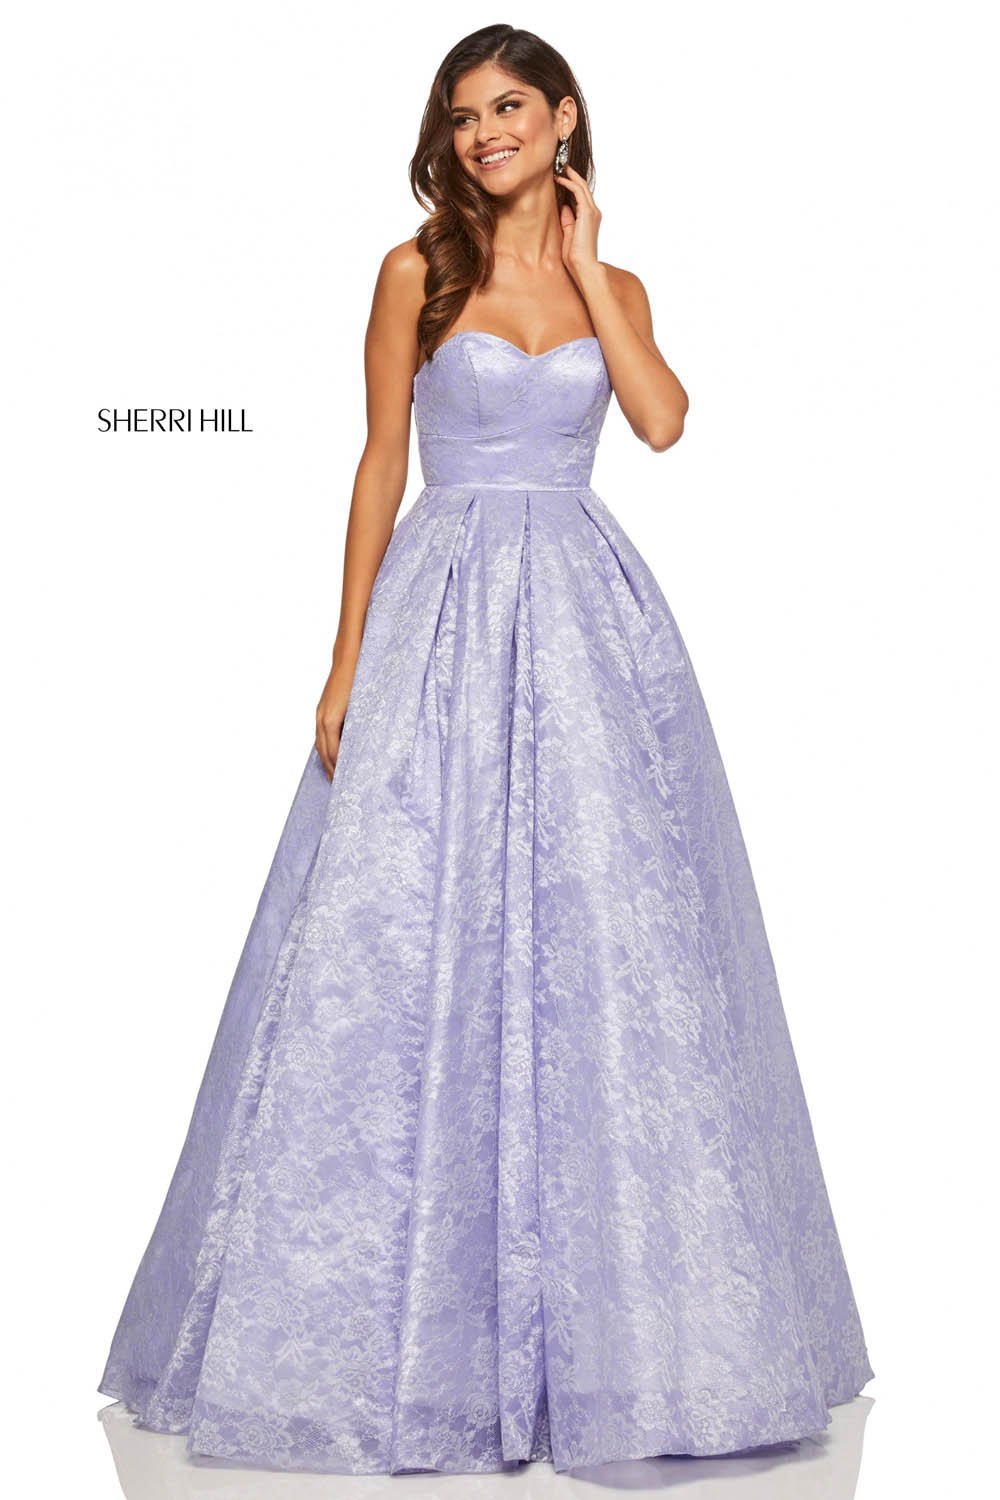 Sherri Hill 52500 dress images in these colors: Lilac.